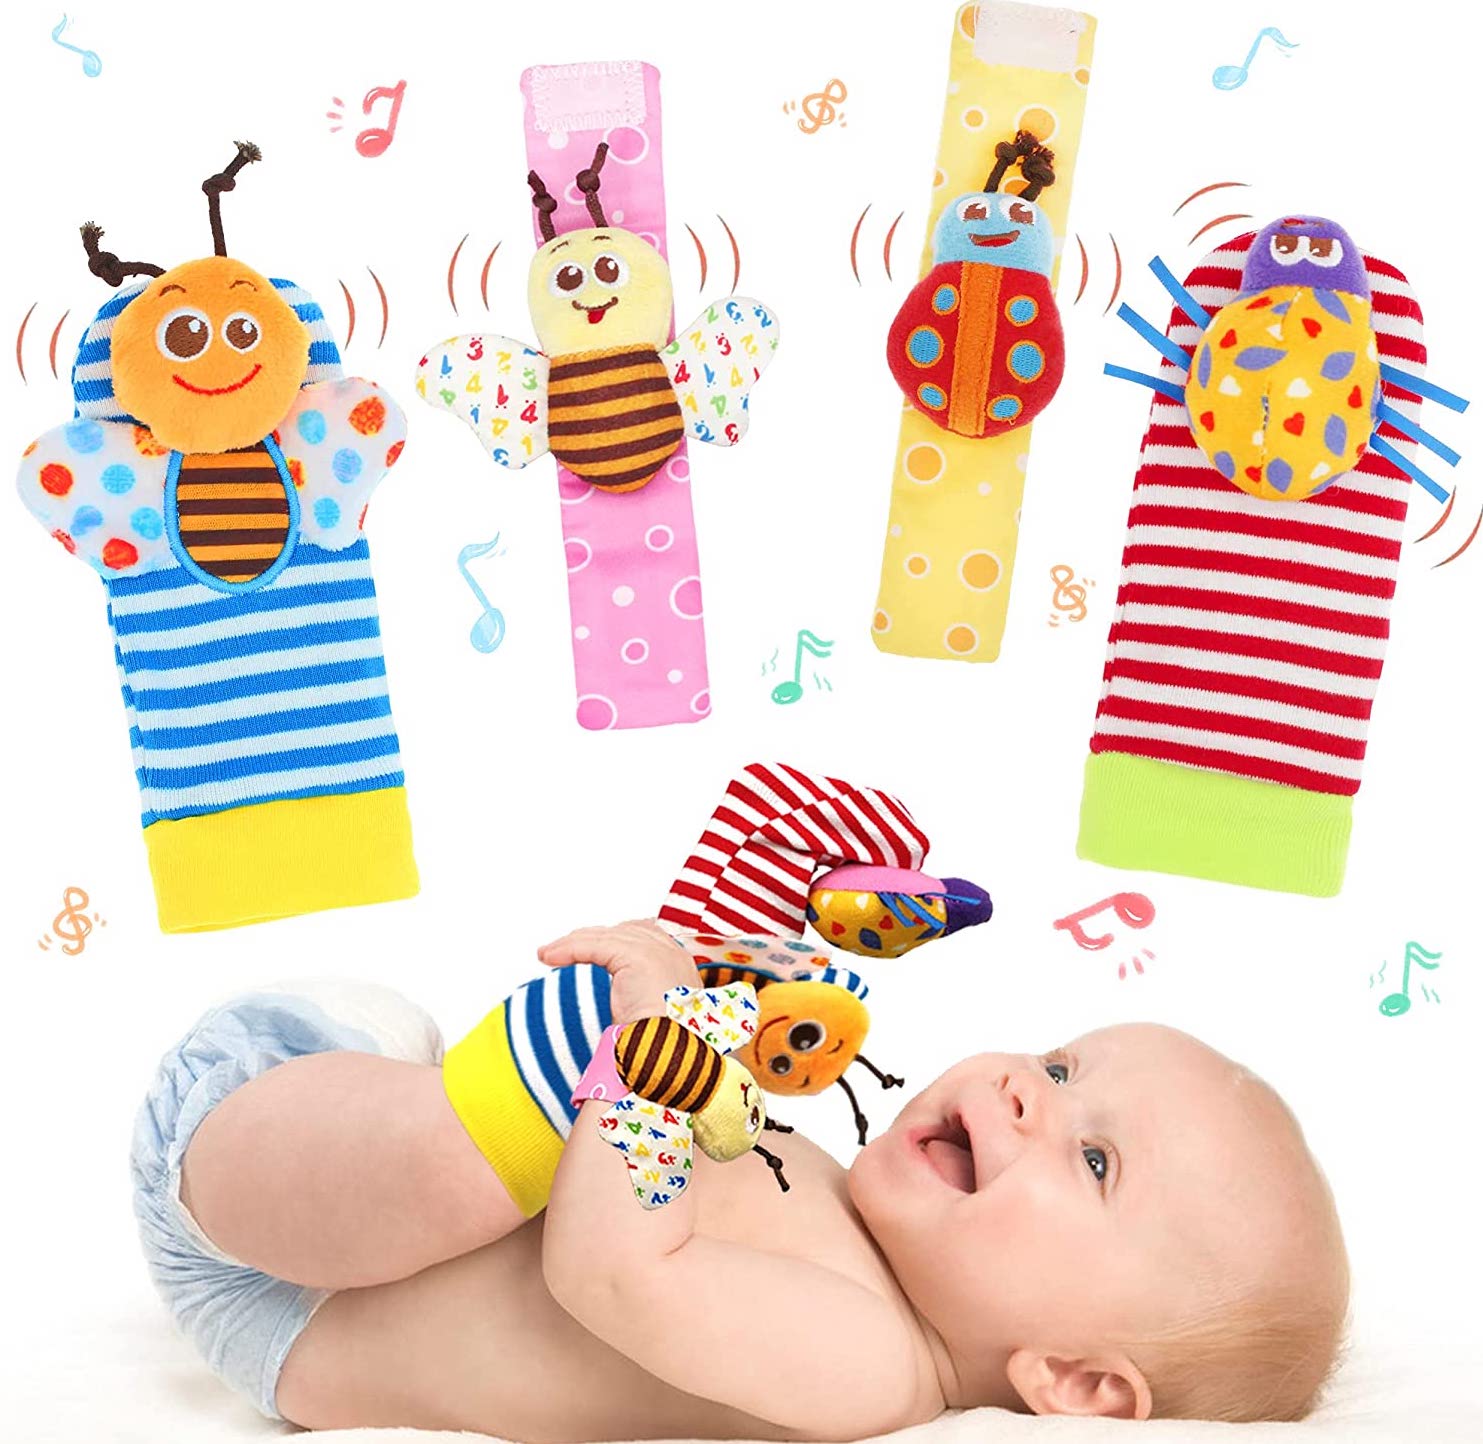 Baby laughing with stripe socks on with different noise making bugs